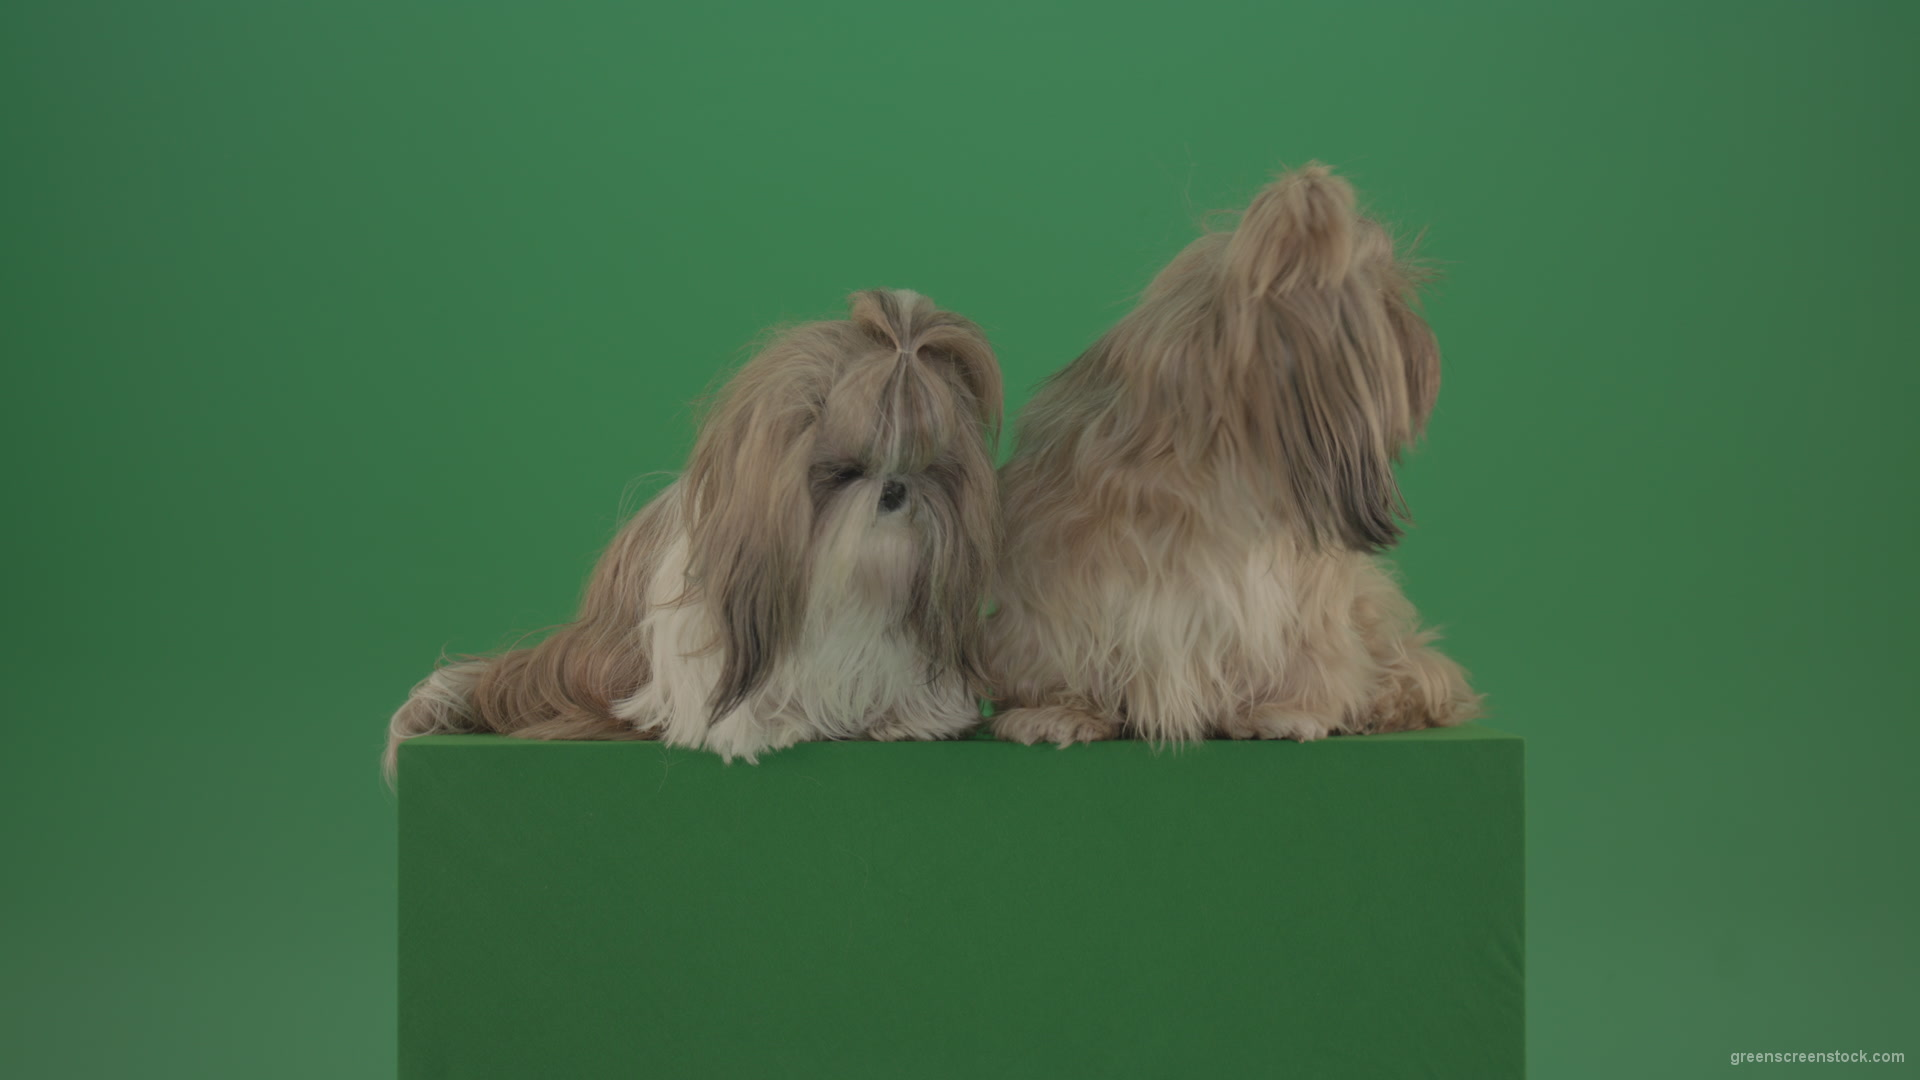 Award-winning-Small-toy-Shihtzu-Dogs-isolated-on-green-screen_004 Green Screen Stock